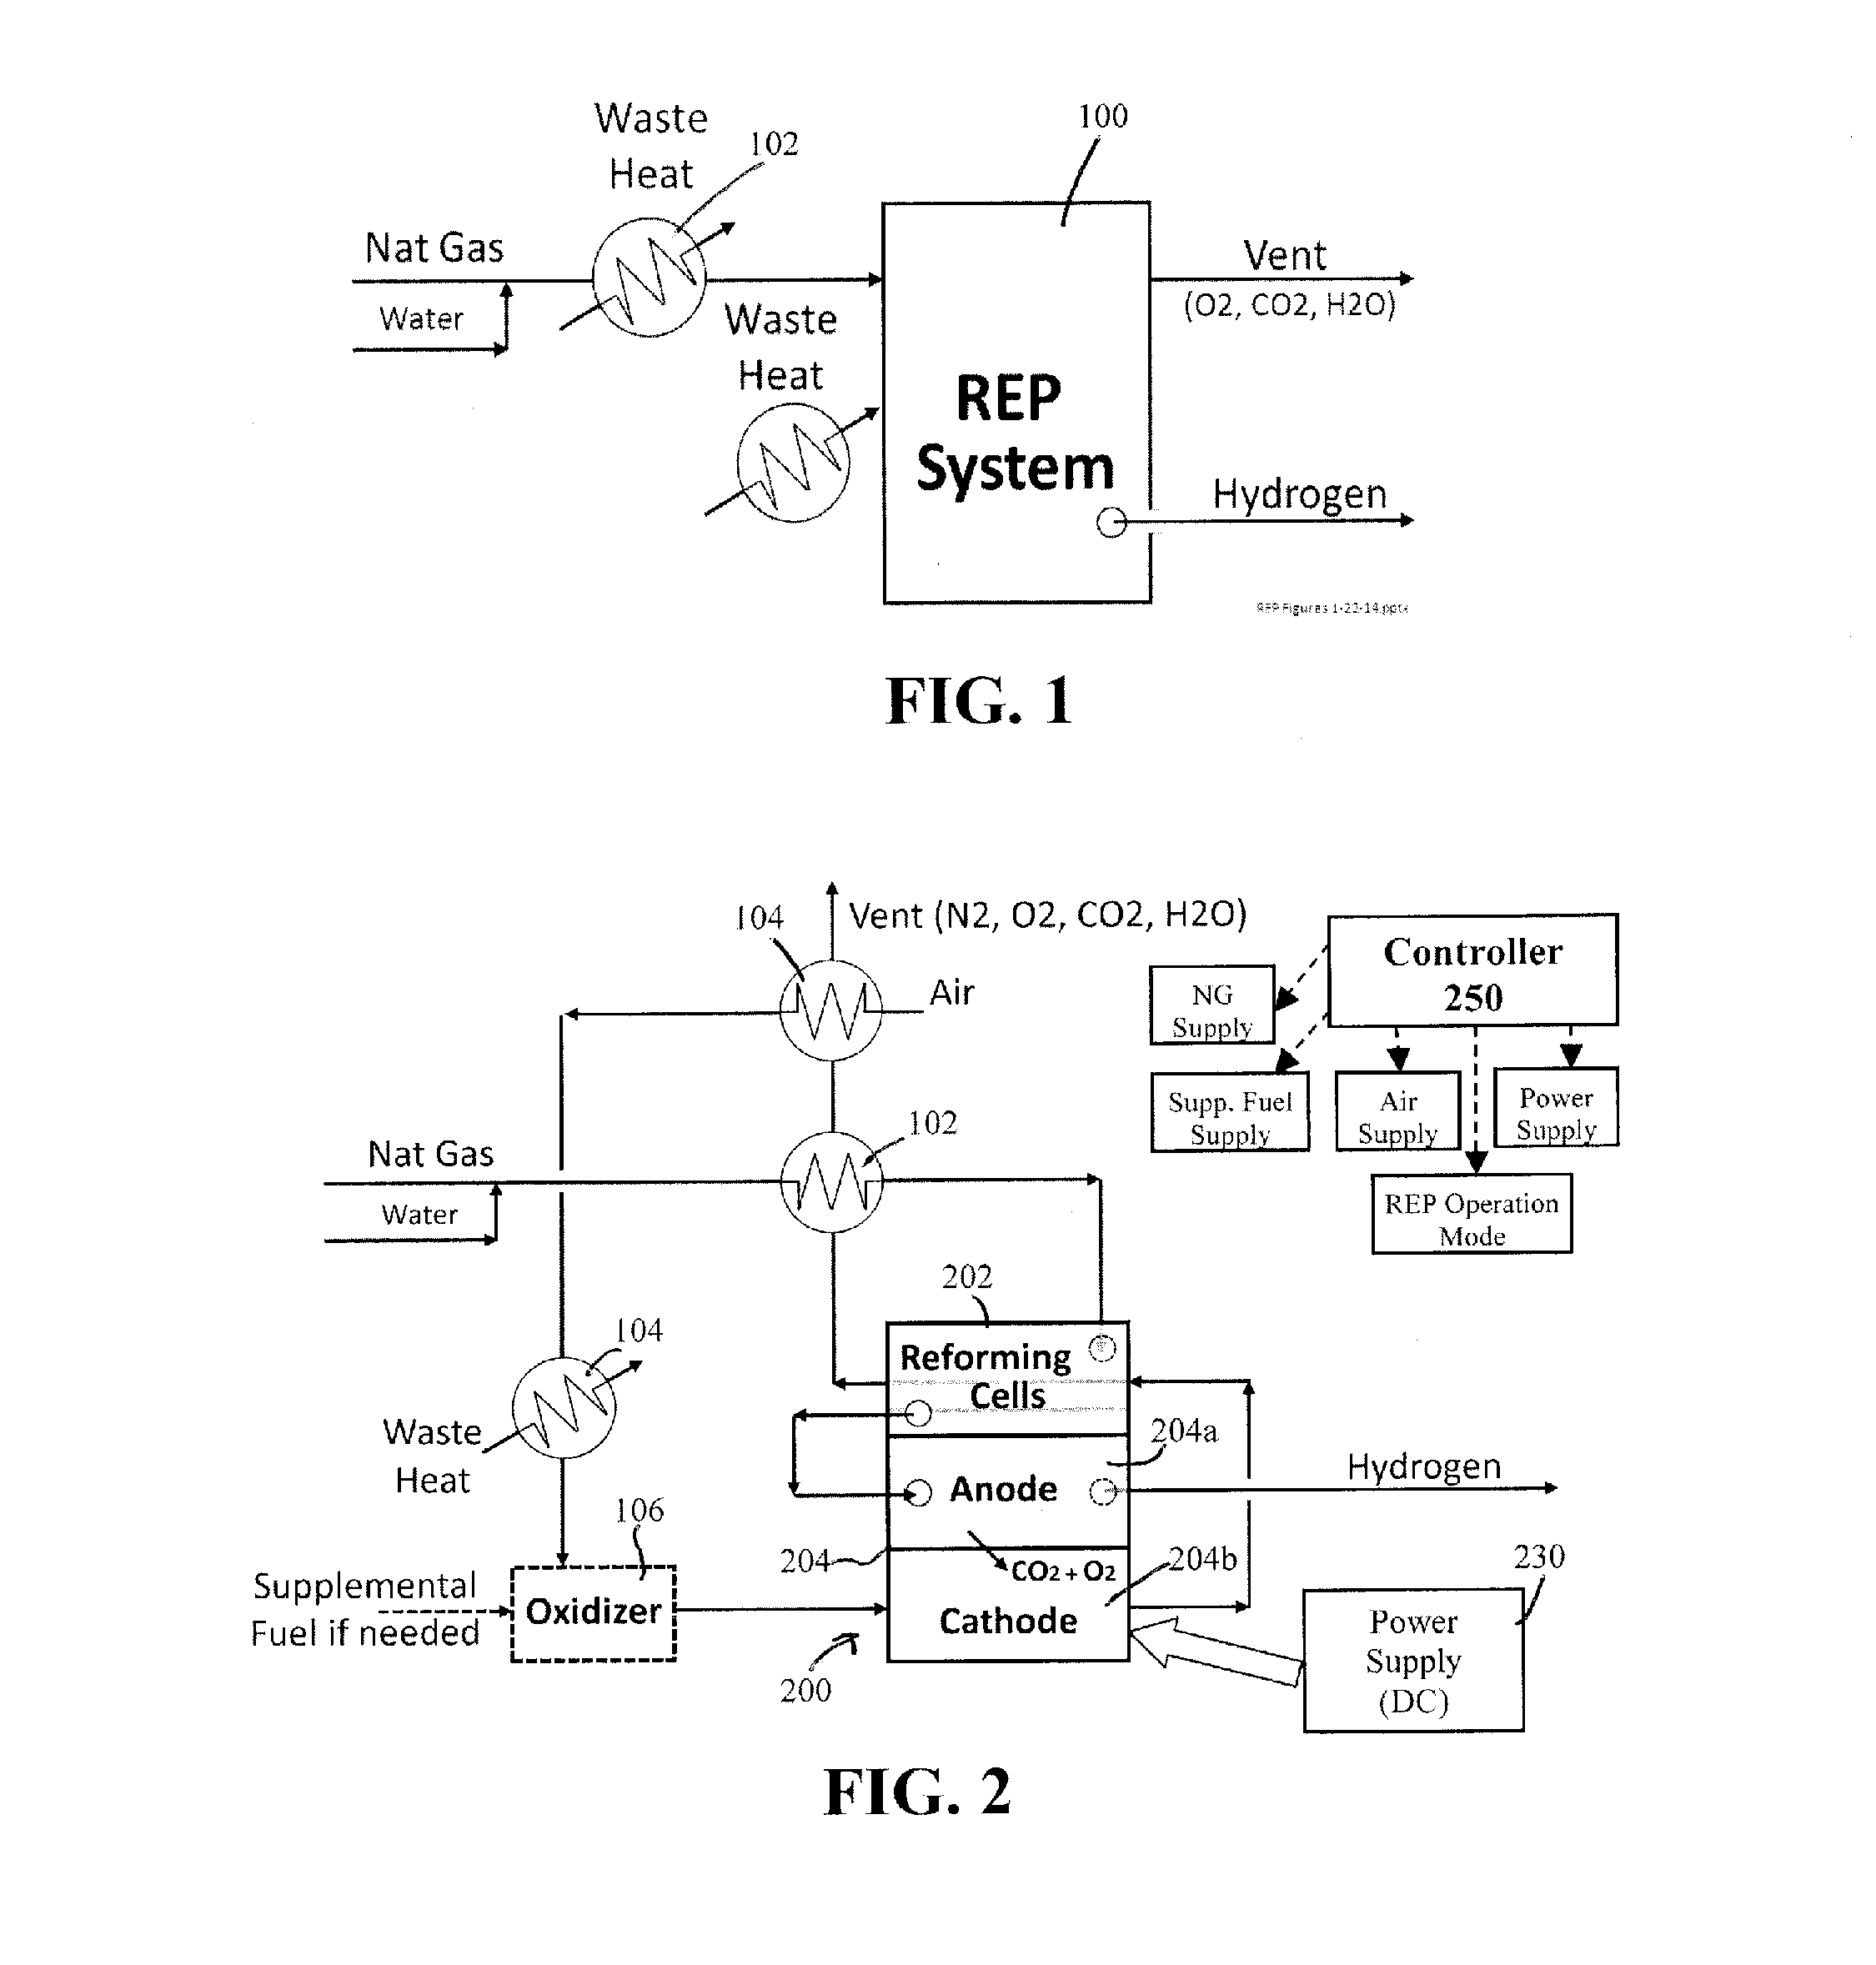 Reformer-electrolyzer-purifier (REP) assembly for hydrogen production, systems incorporating same and method of producing hydrogen